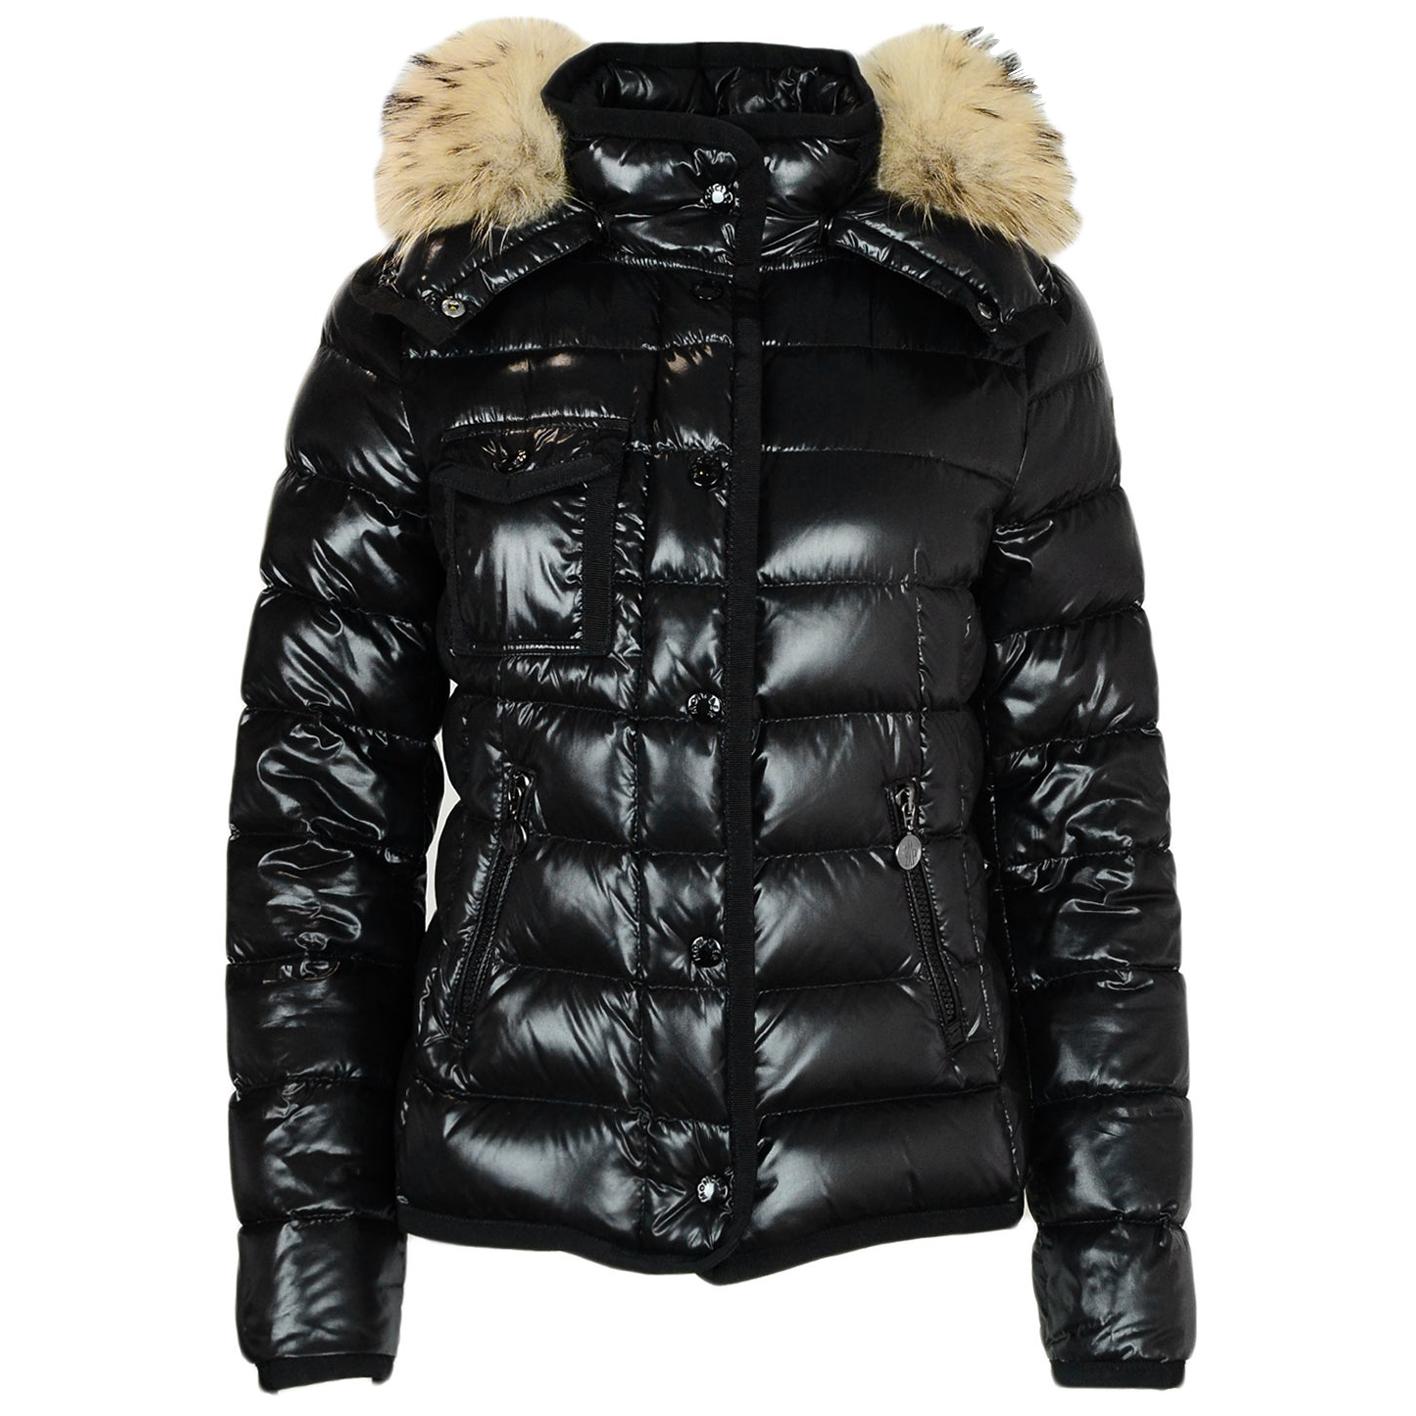 Moncler Black Quilted Armoise Down Jacket w/ Racoon Fur Hood sz 1 rt $1, 850